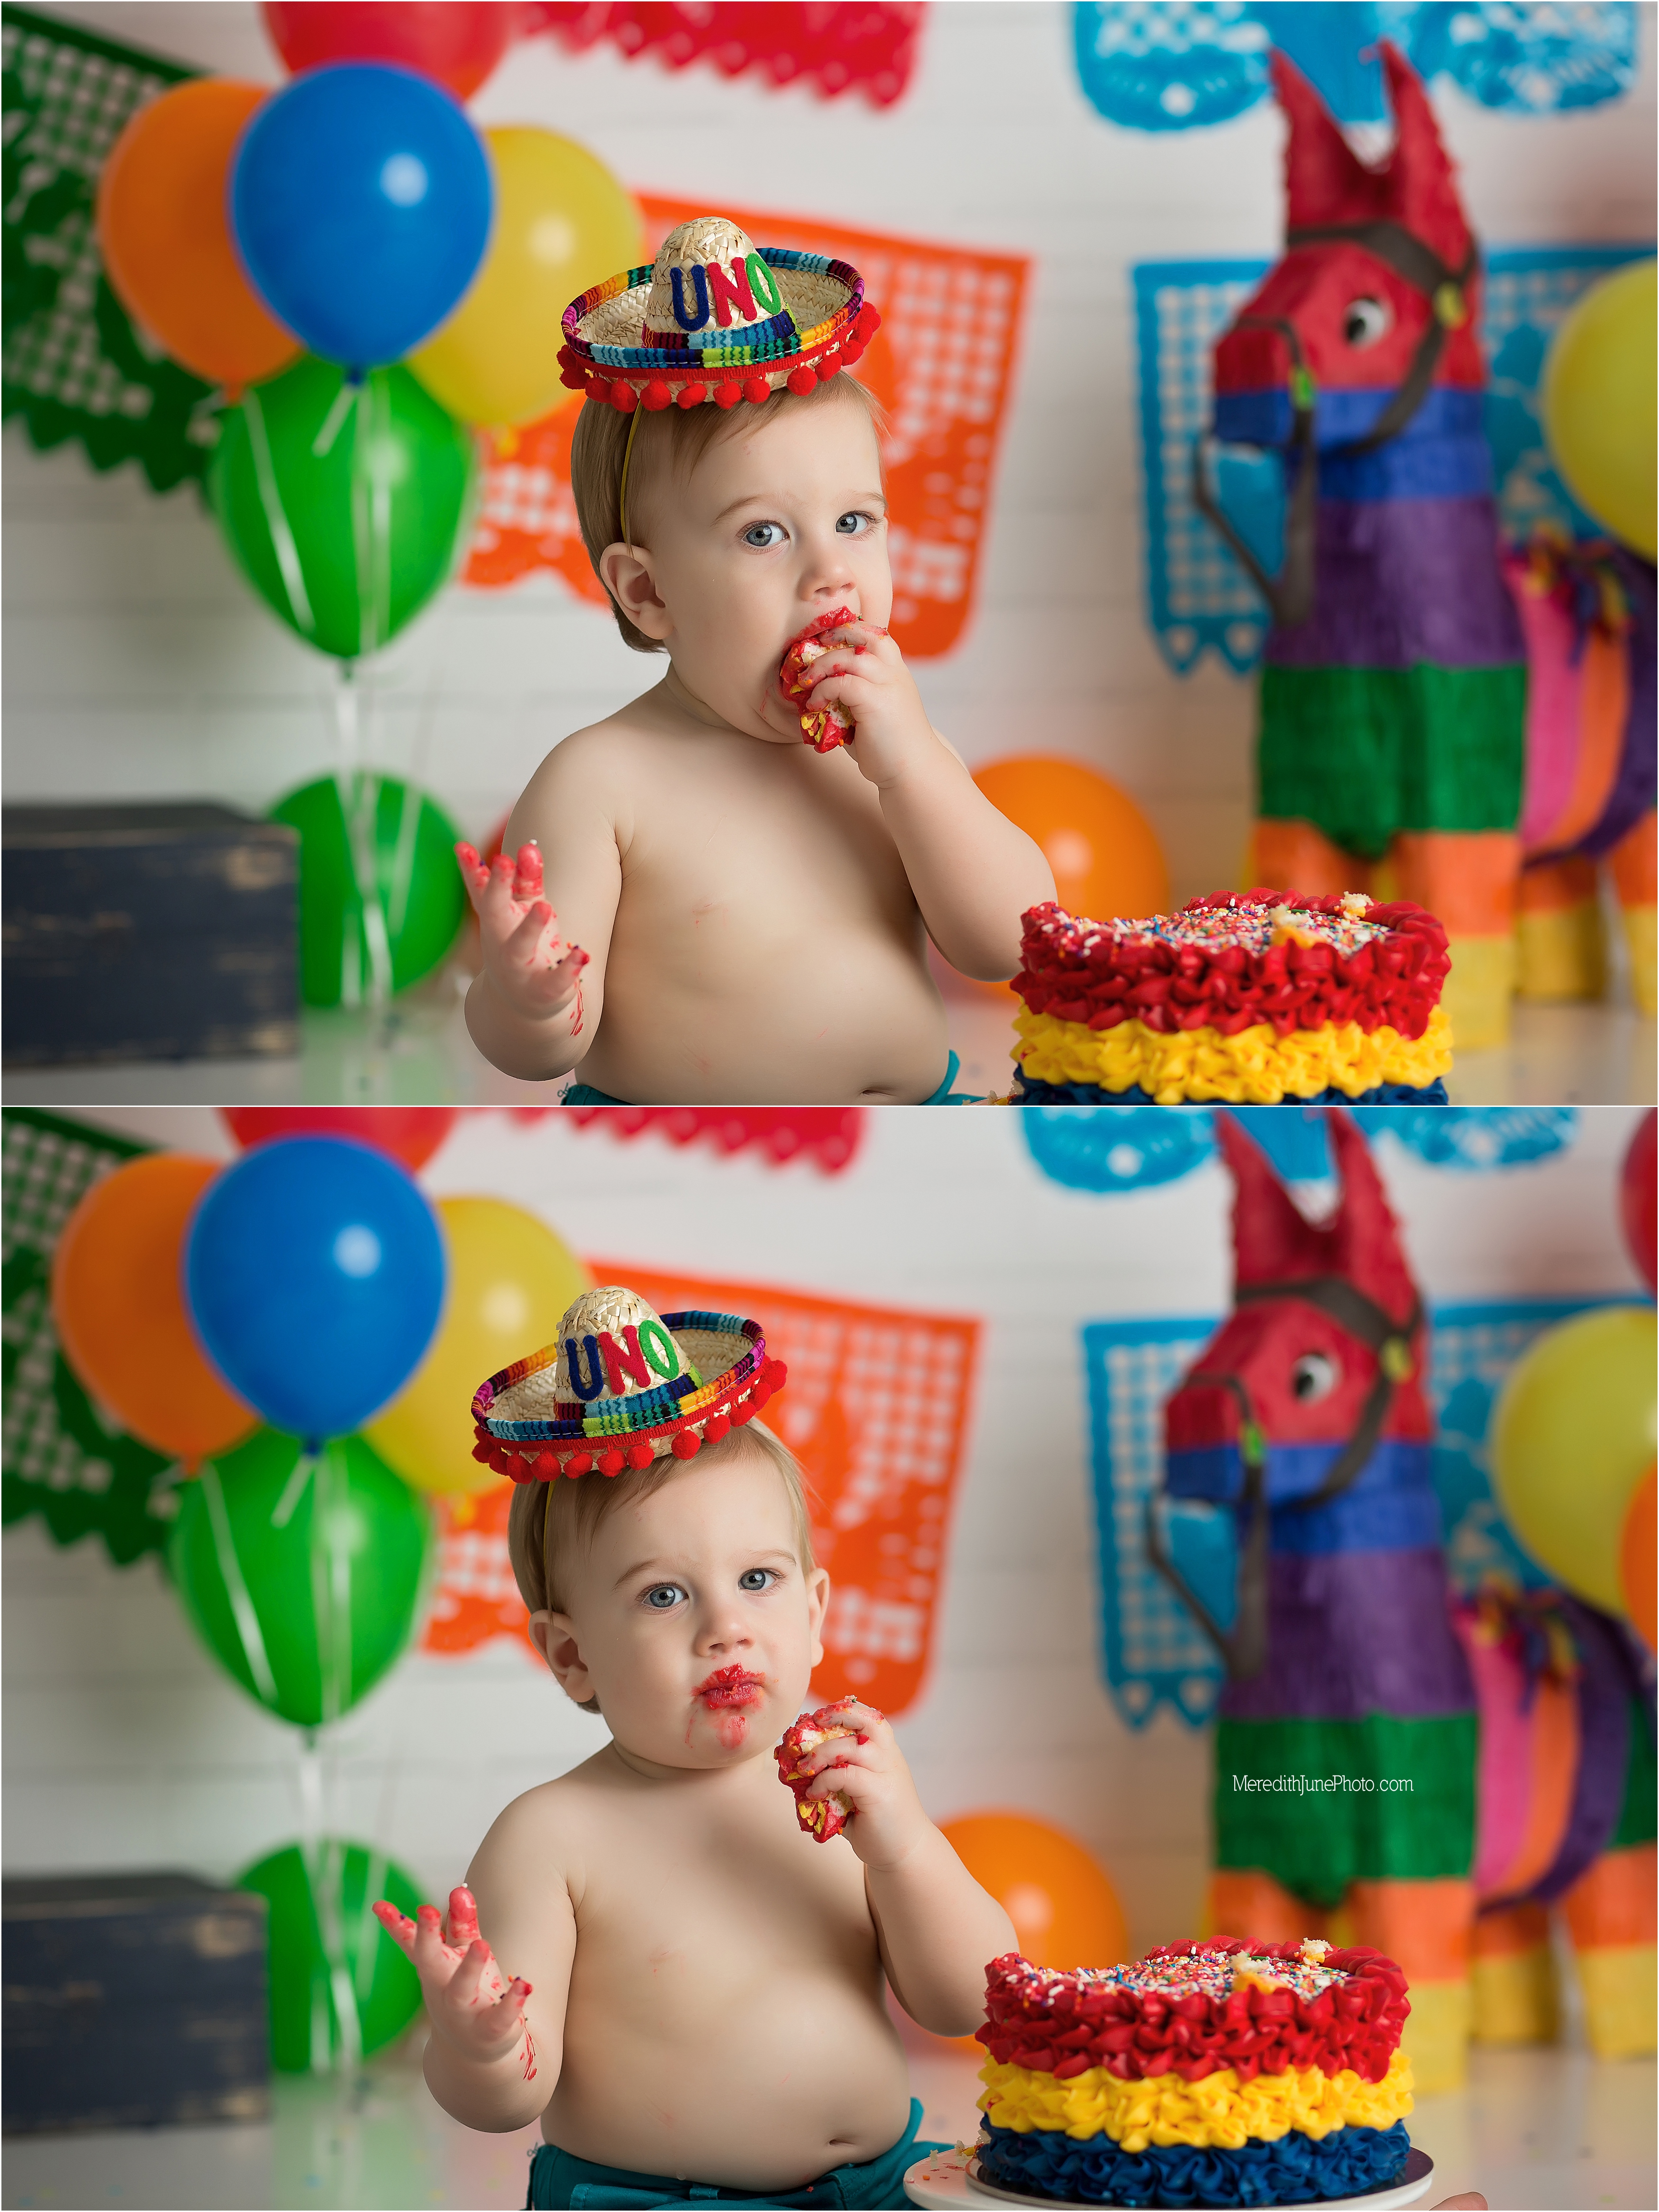 Baby Luke turns one with at Meredith June Photography